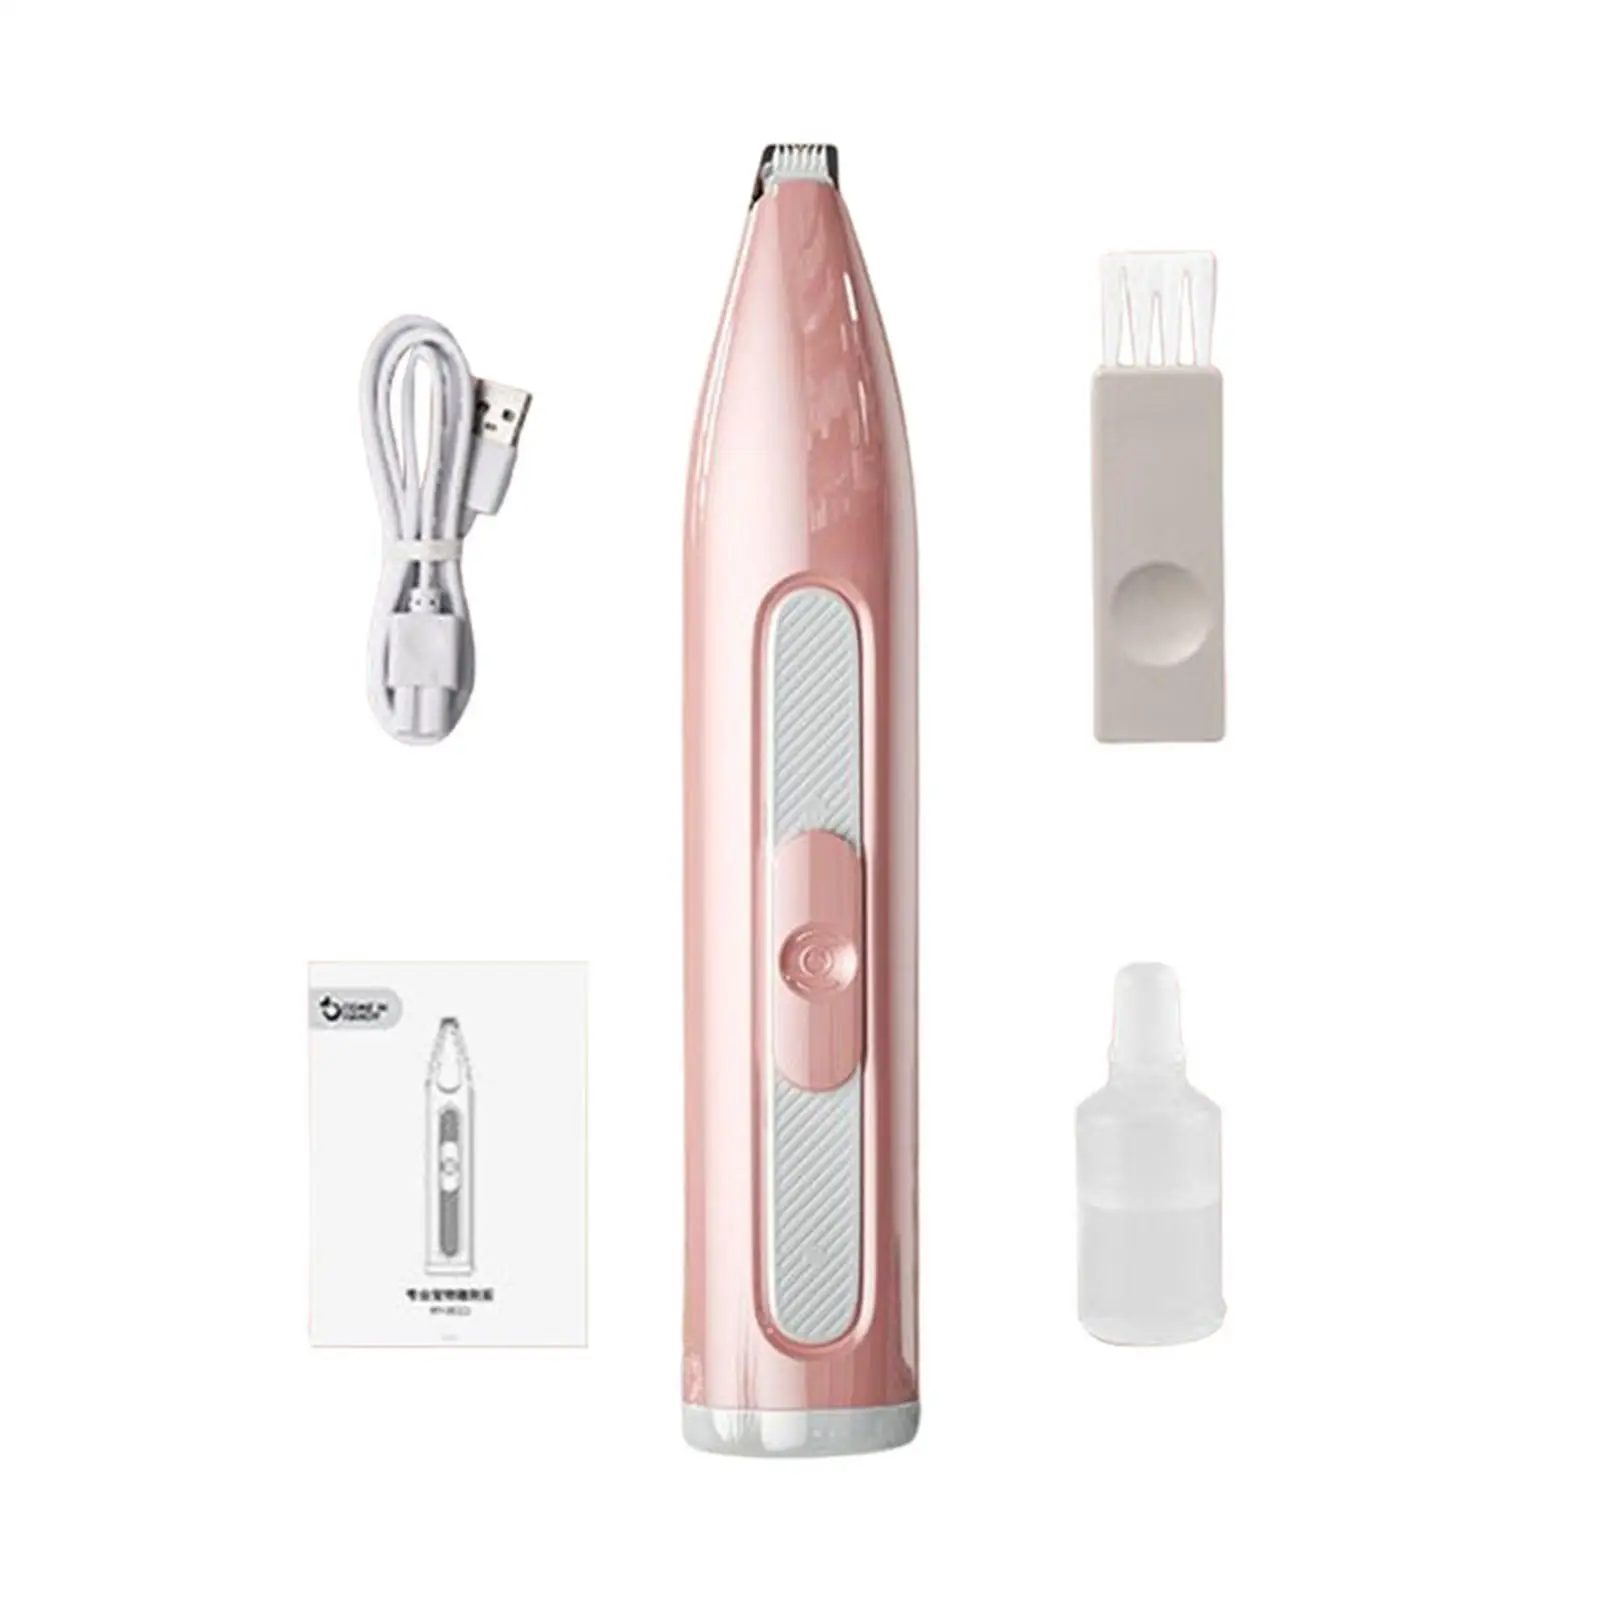 Electrical Cat Hair Trimmer Dog Hair Clippers Mute Haircut Tool Kitten Cordless Puppy Small for Cat Ear Grinding Eyes Toes Paw